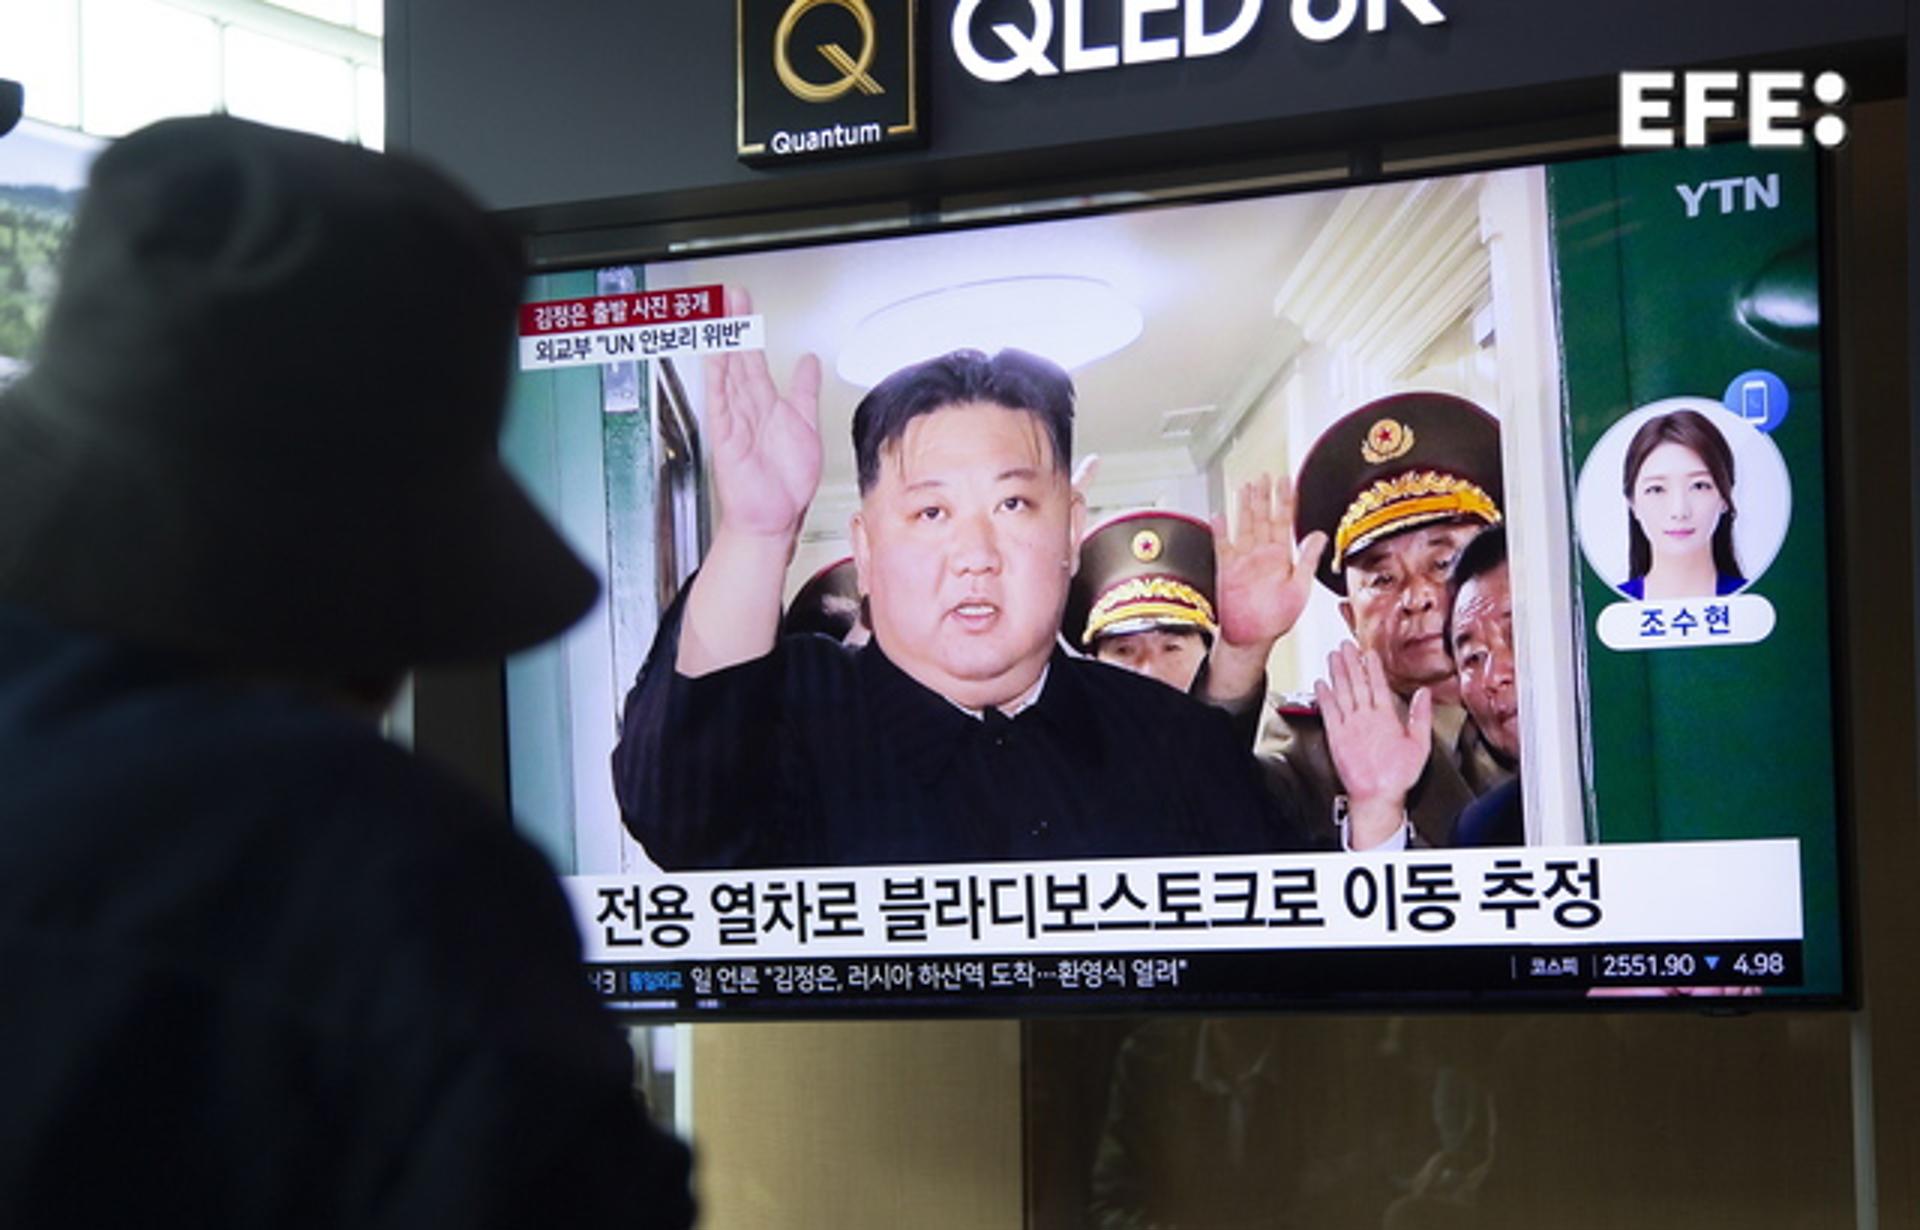 A man watches a news segment detailing North Korean Leader Kim Jong-un's visit to Russia, at a station in Seoul, South Korea, 12 September 2023. EFE/EPA/JEON HEON-KYUN